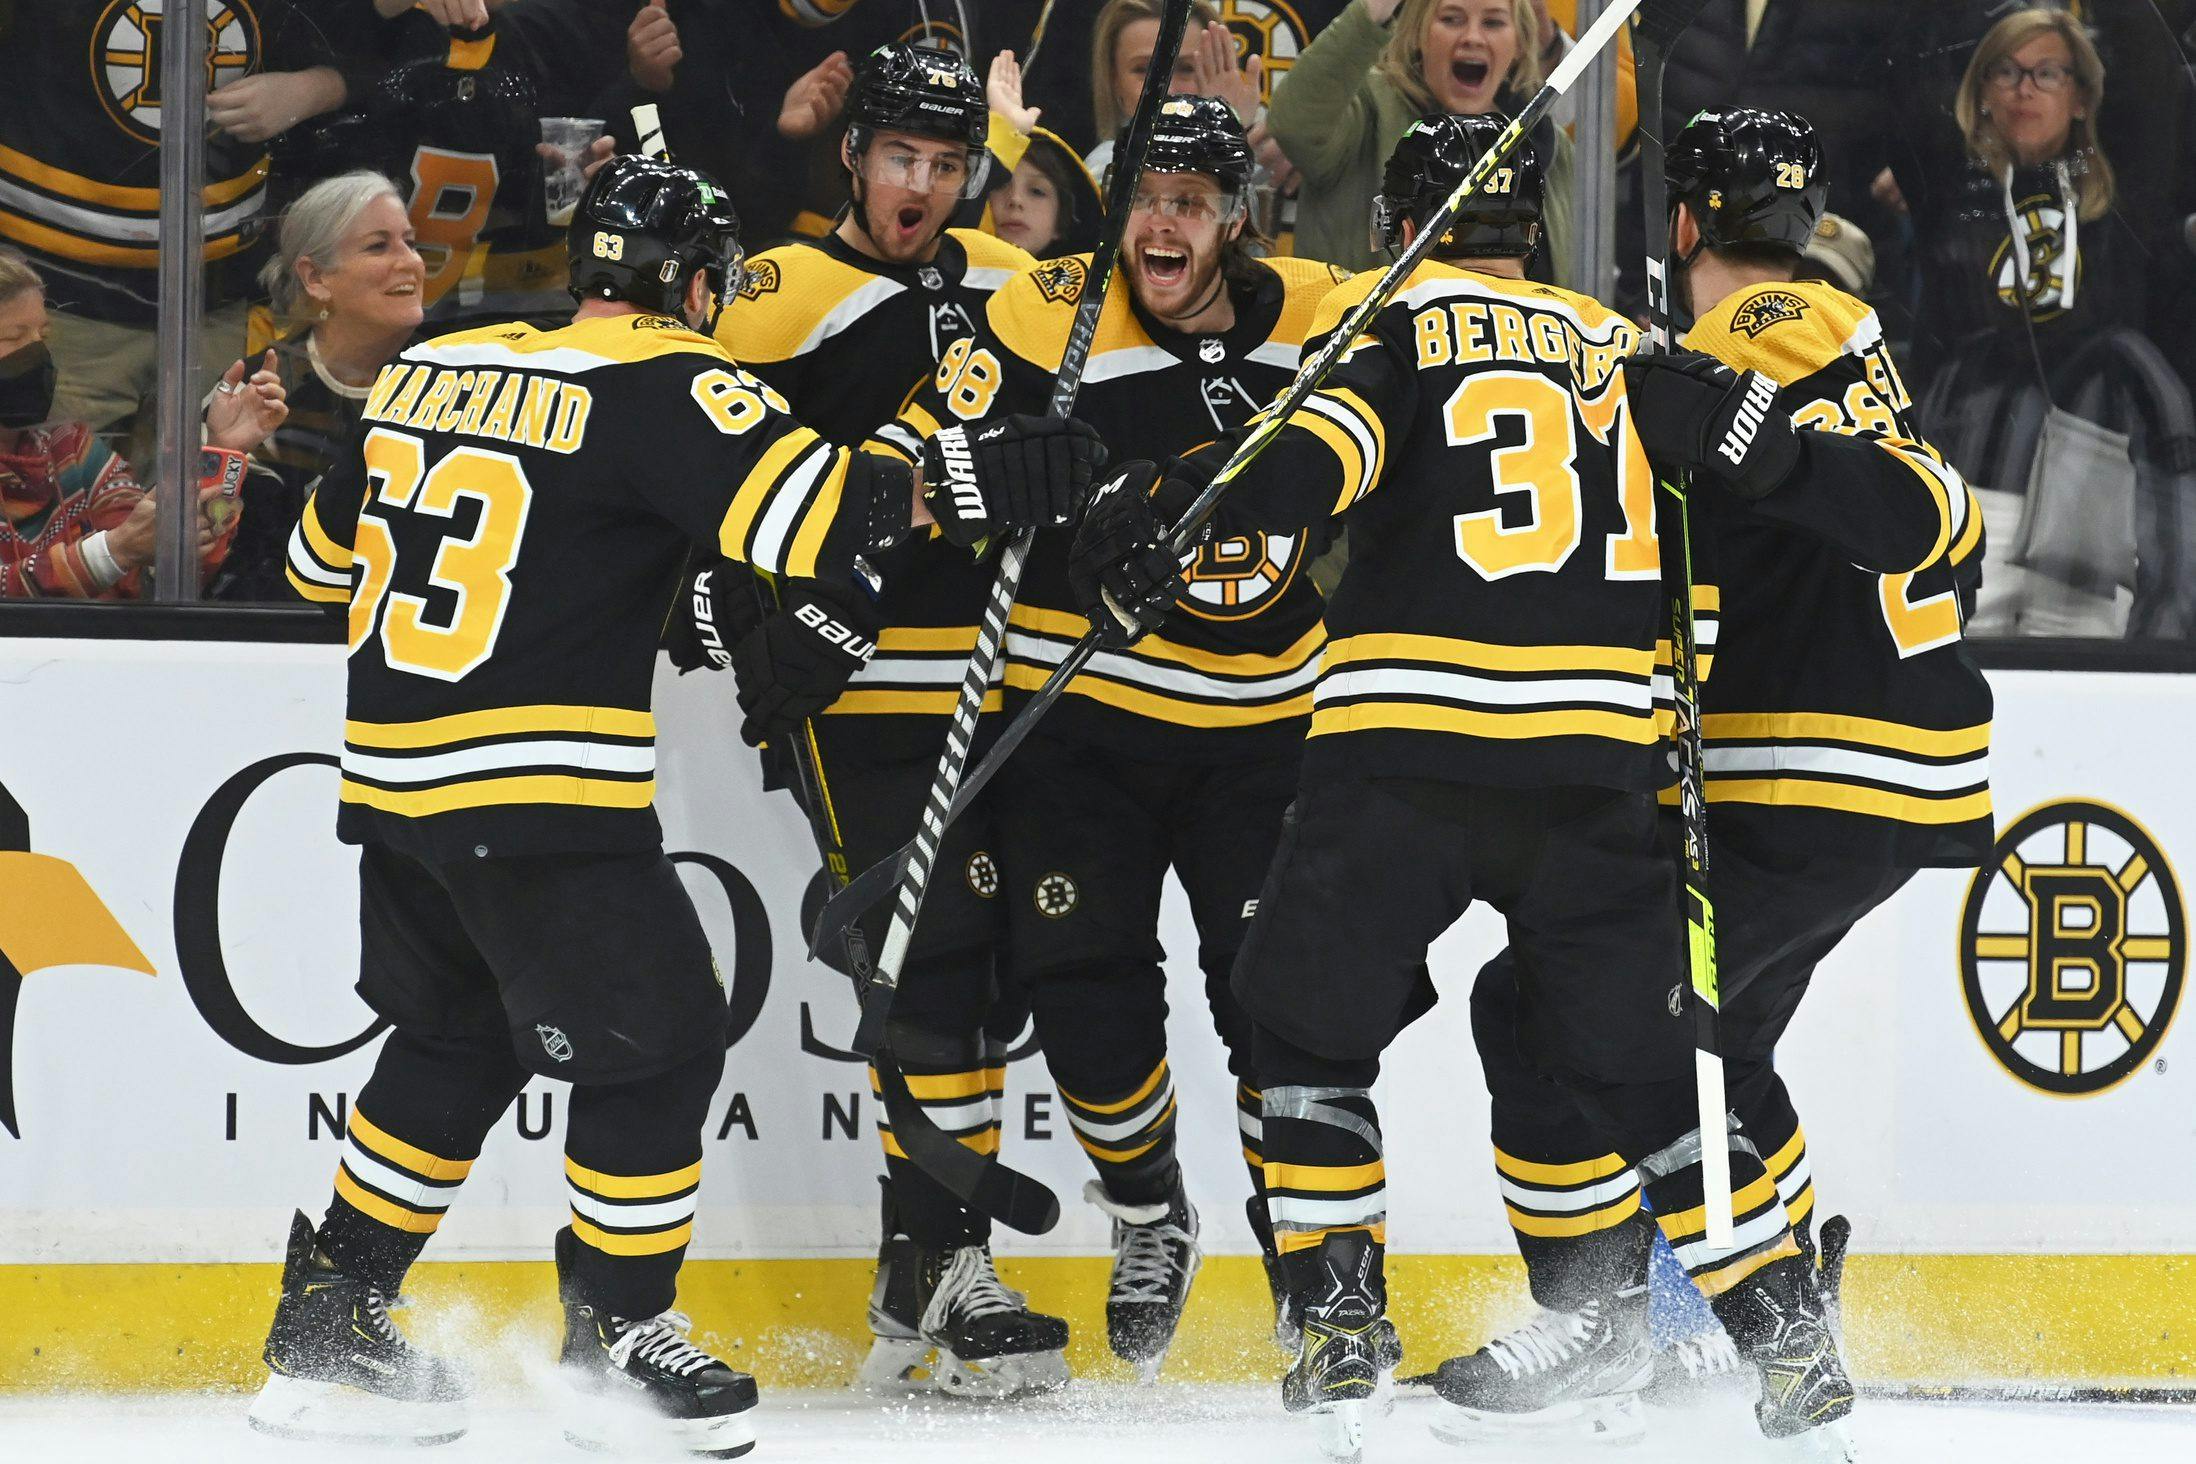 Bruins announce full schedule for 2022-23 season